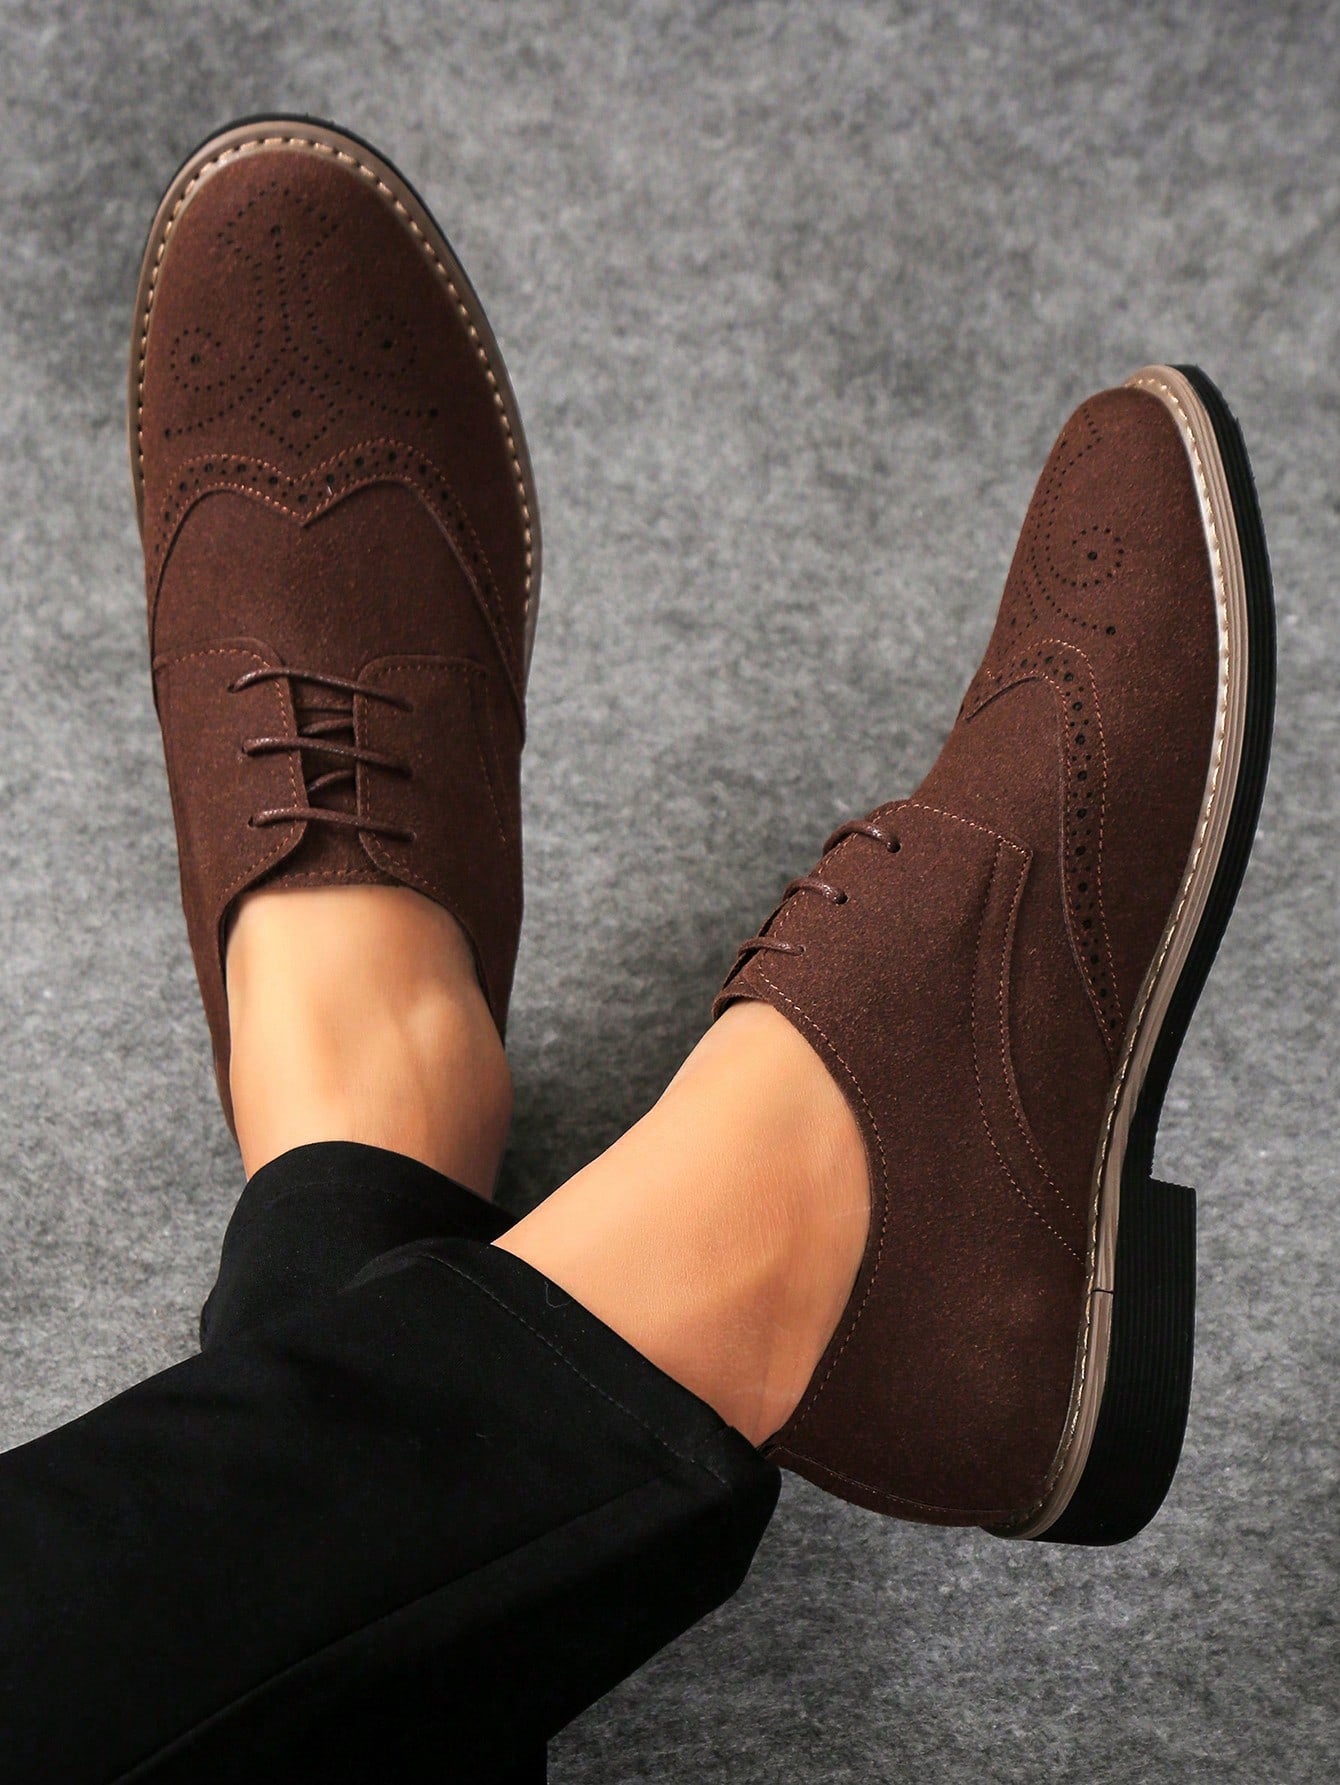 Men's Suede-Like Lightweight Wingtip Carving Round Toe Lace-Up Low Heel Brogue Shoes, For Casual Youth Students Daily Use All Seasons